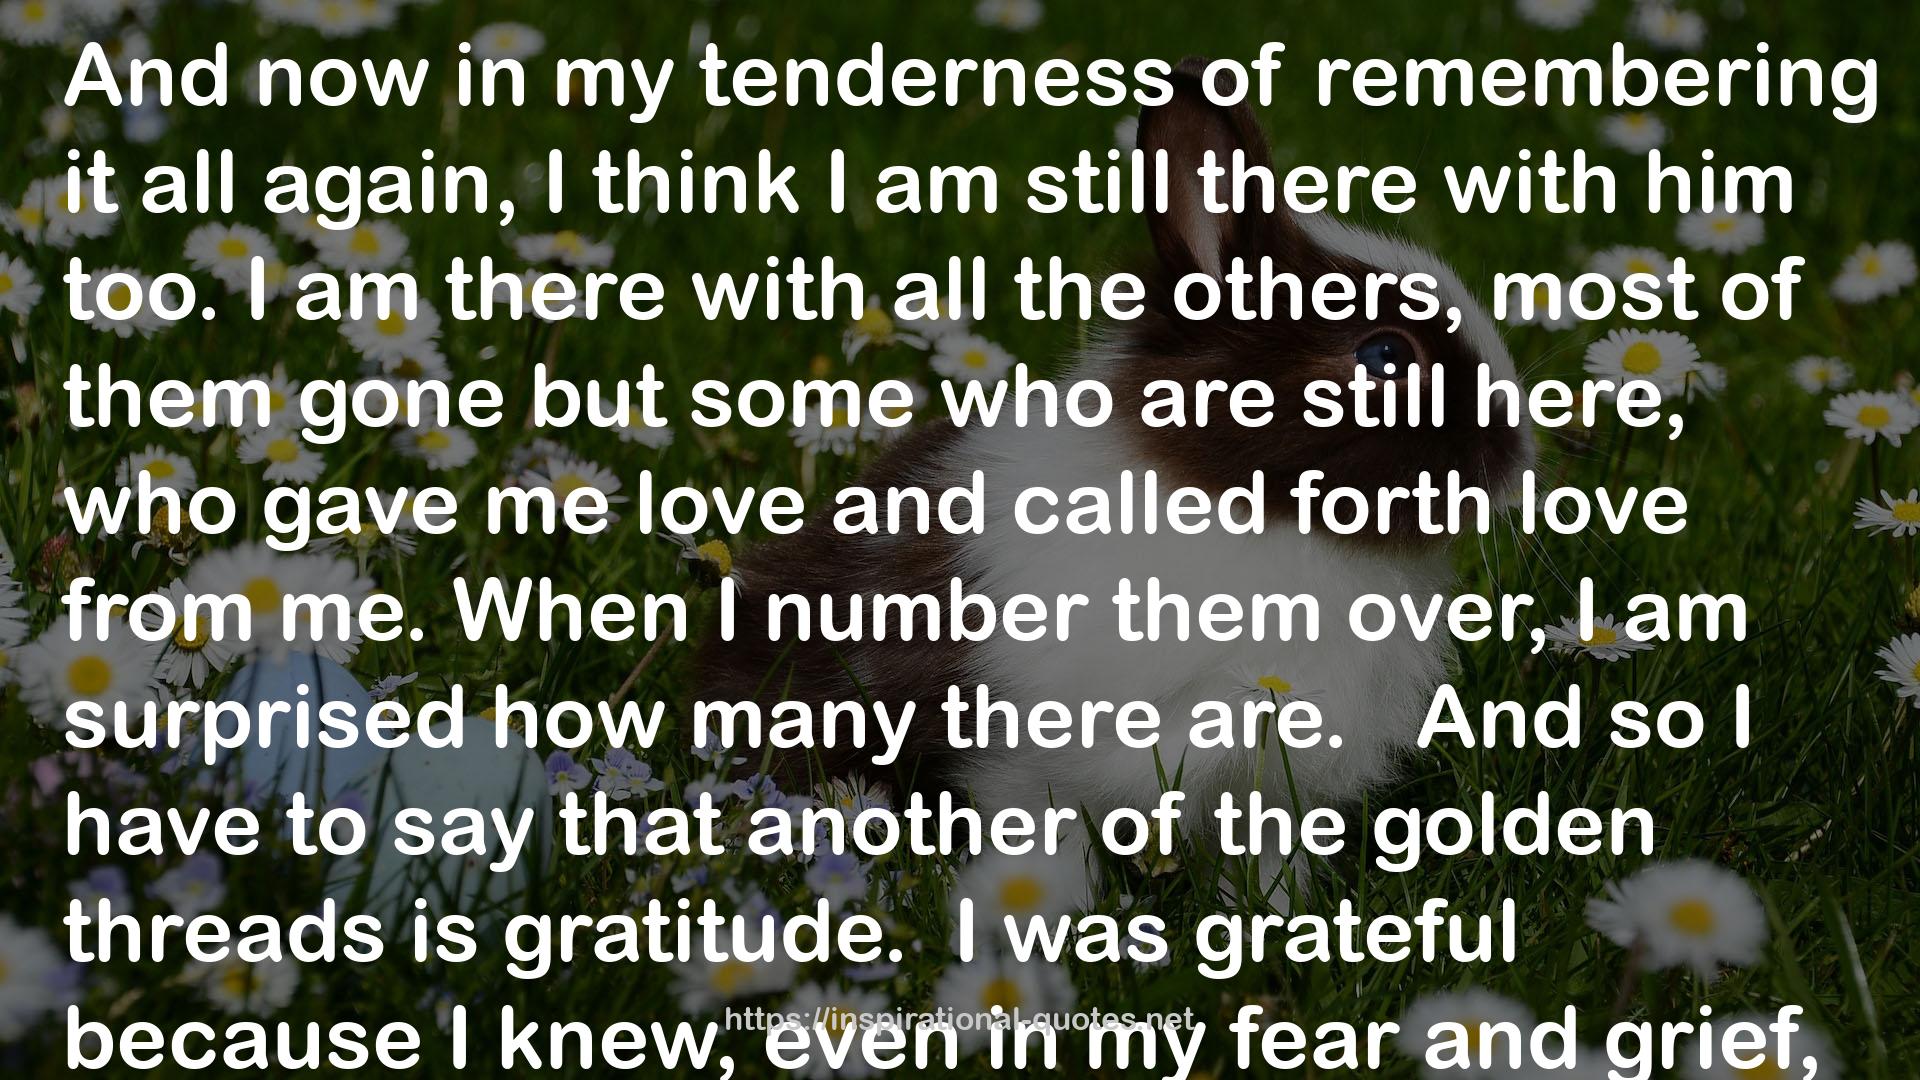 the golden threads  QUOTES